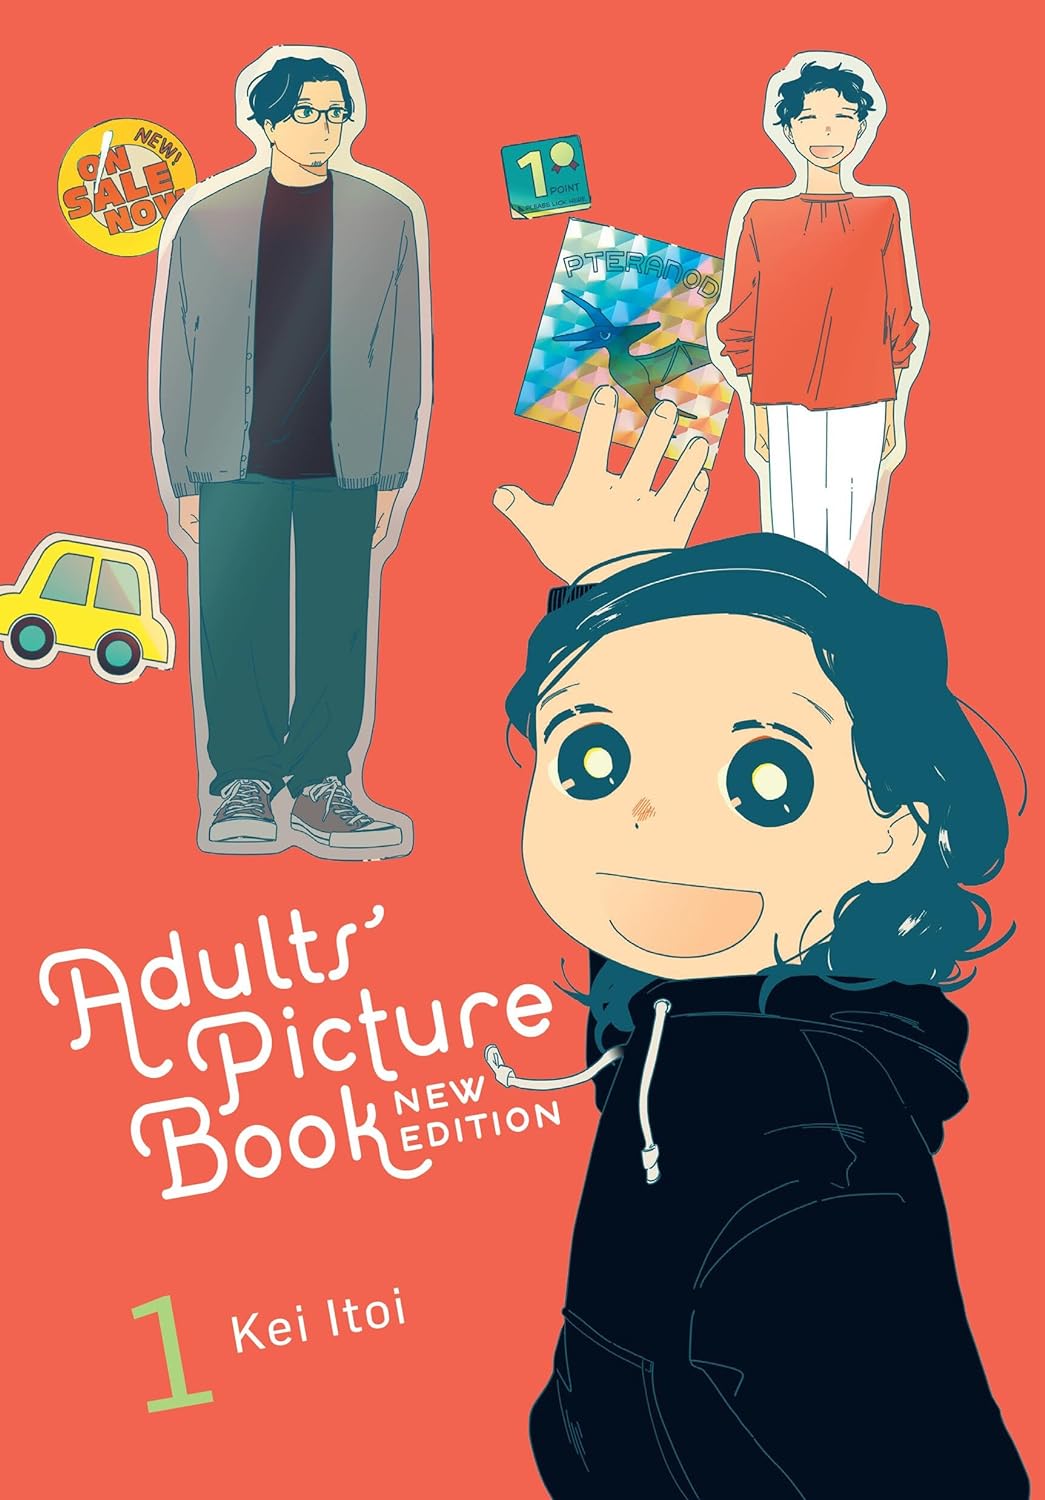 Adults' Picture Book: New Edition Vol. 01